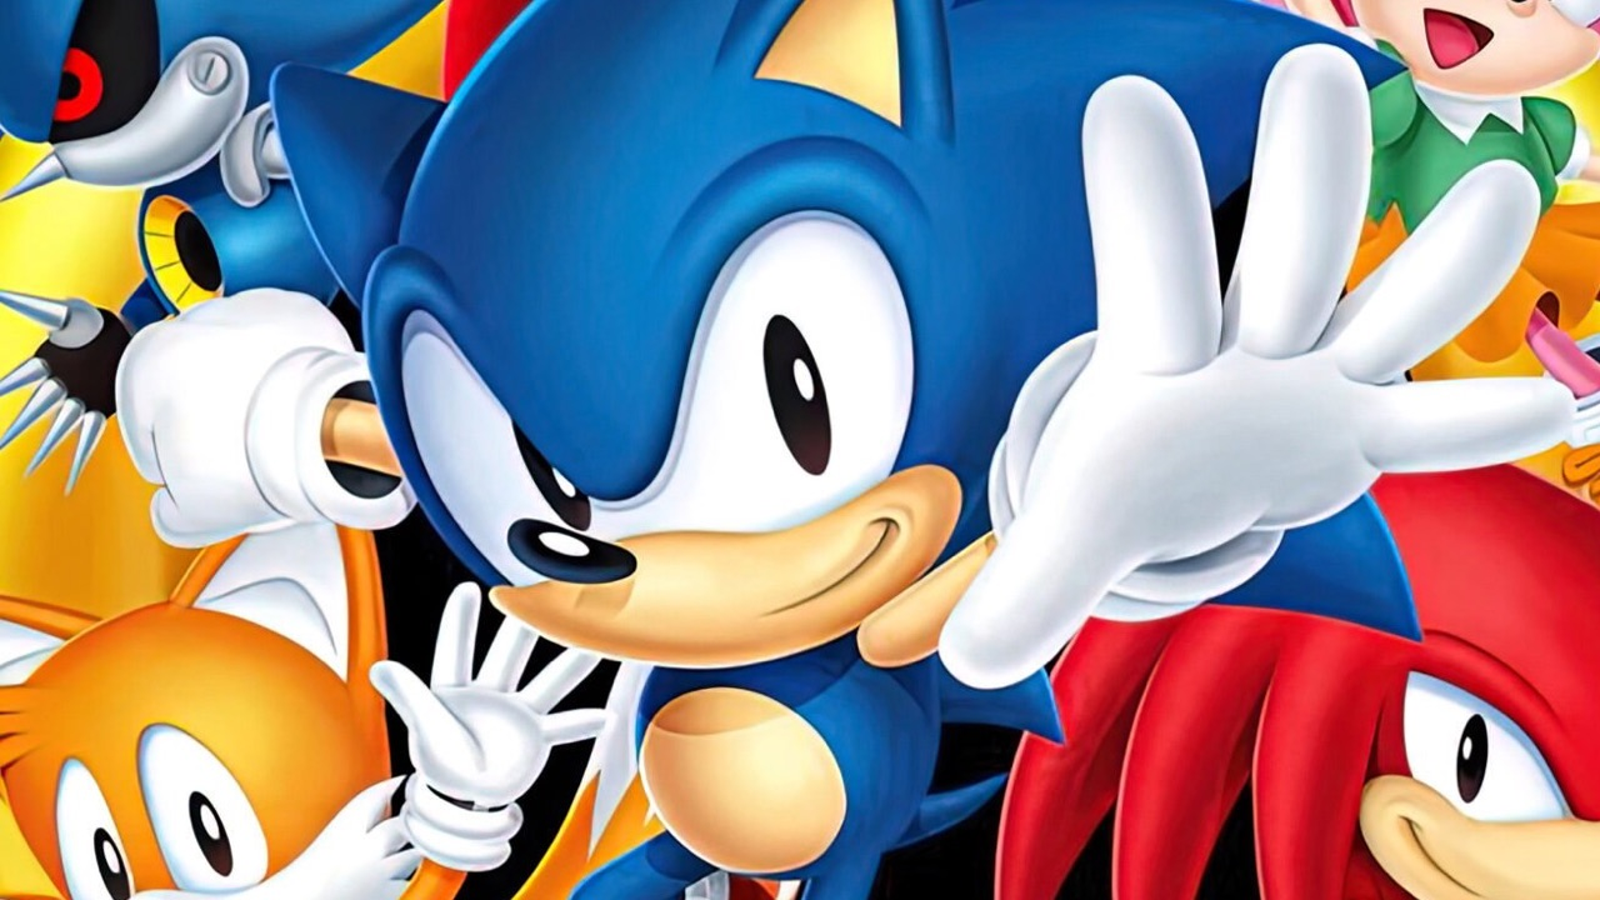 SONIC 3 free online game on